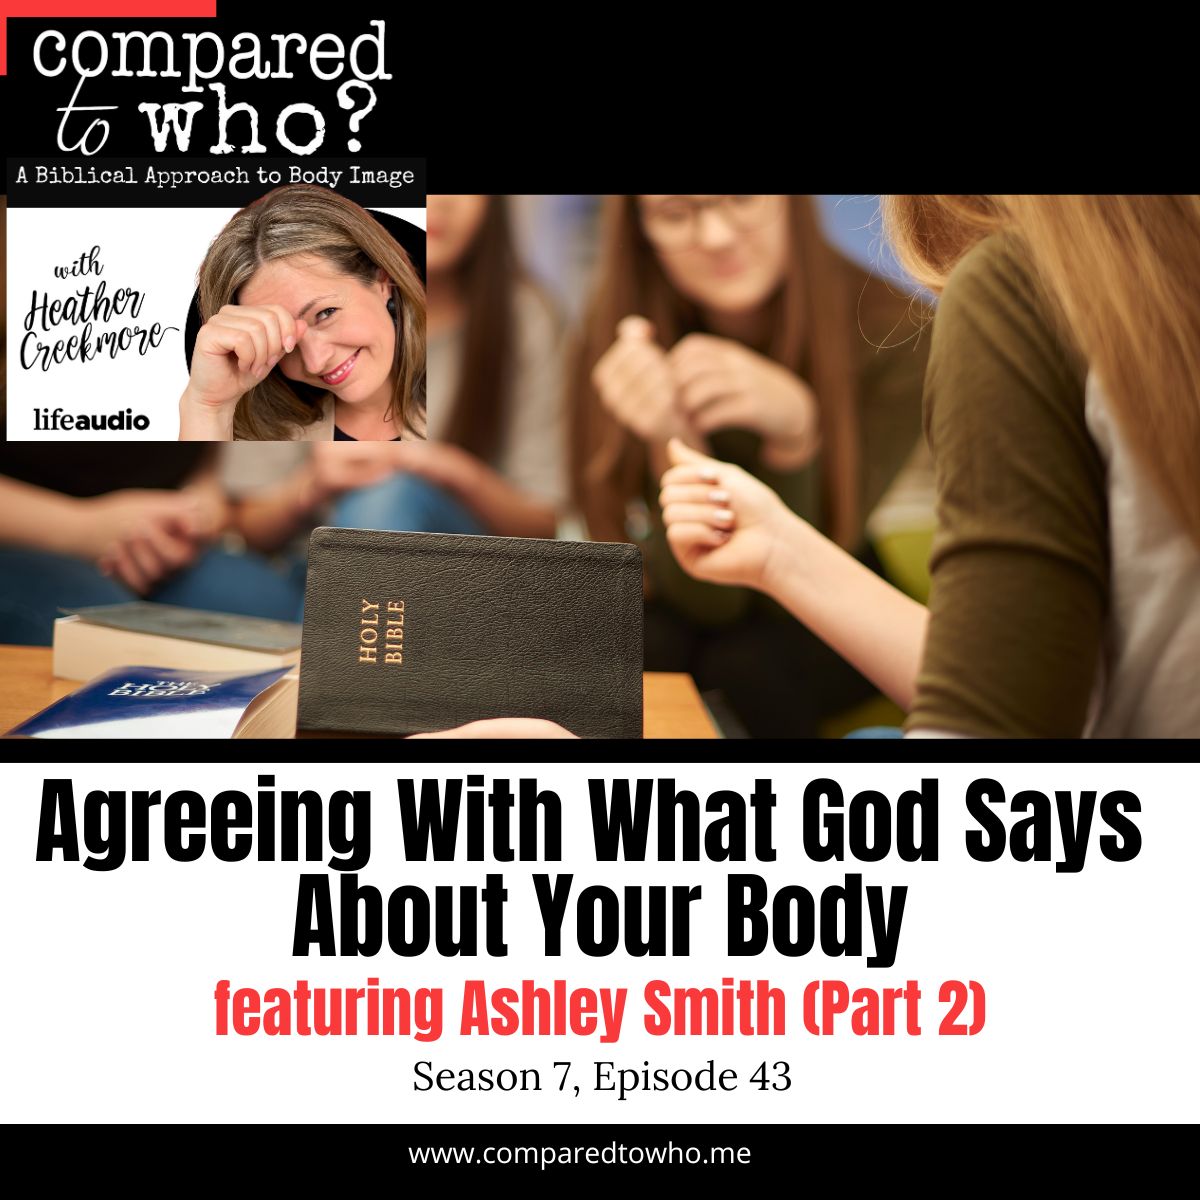 Agreeing With What God Says About Our Bodies Featuring Ashley Smith (Part 2)